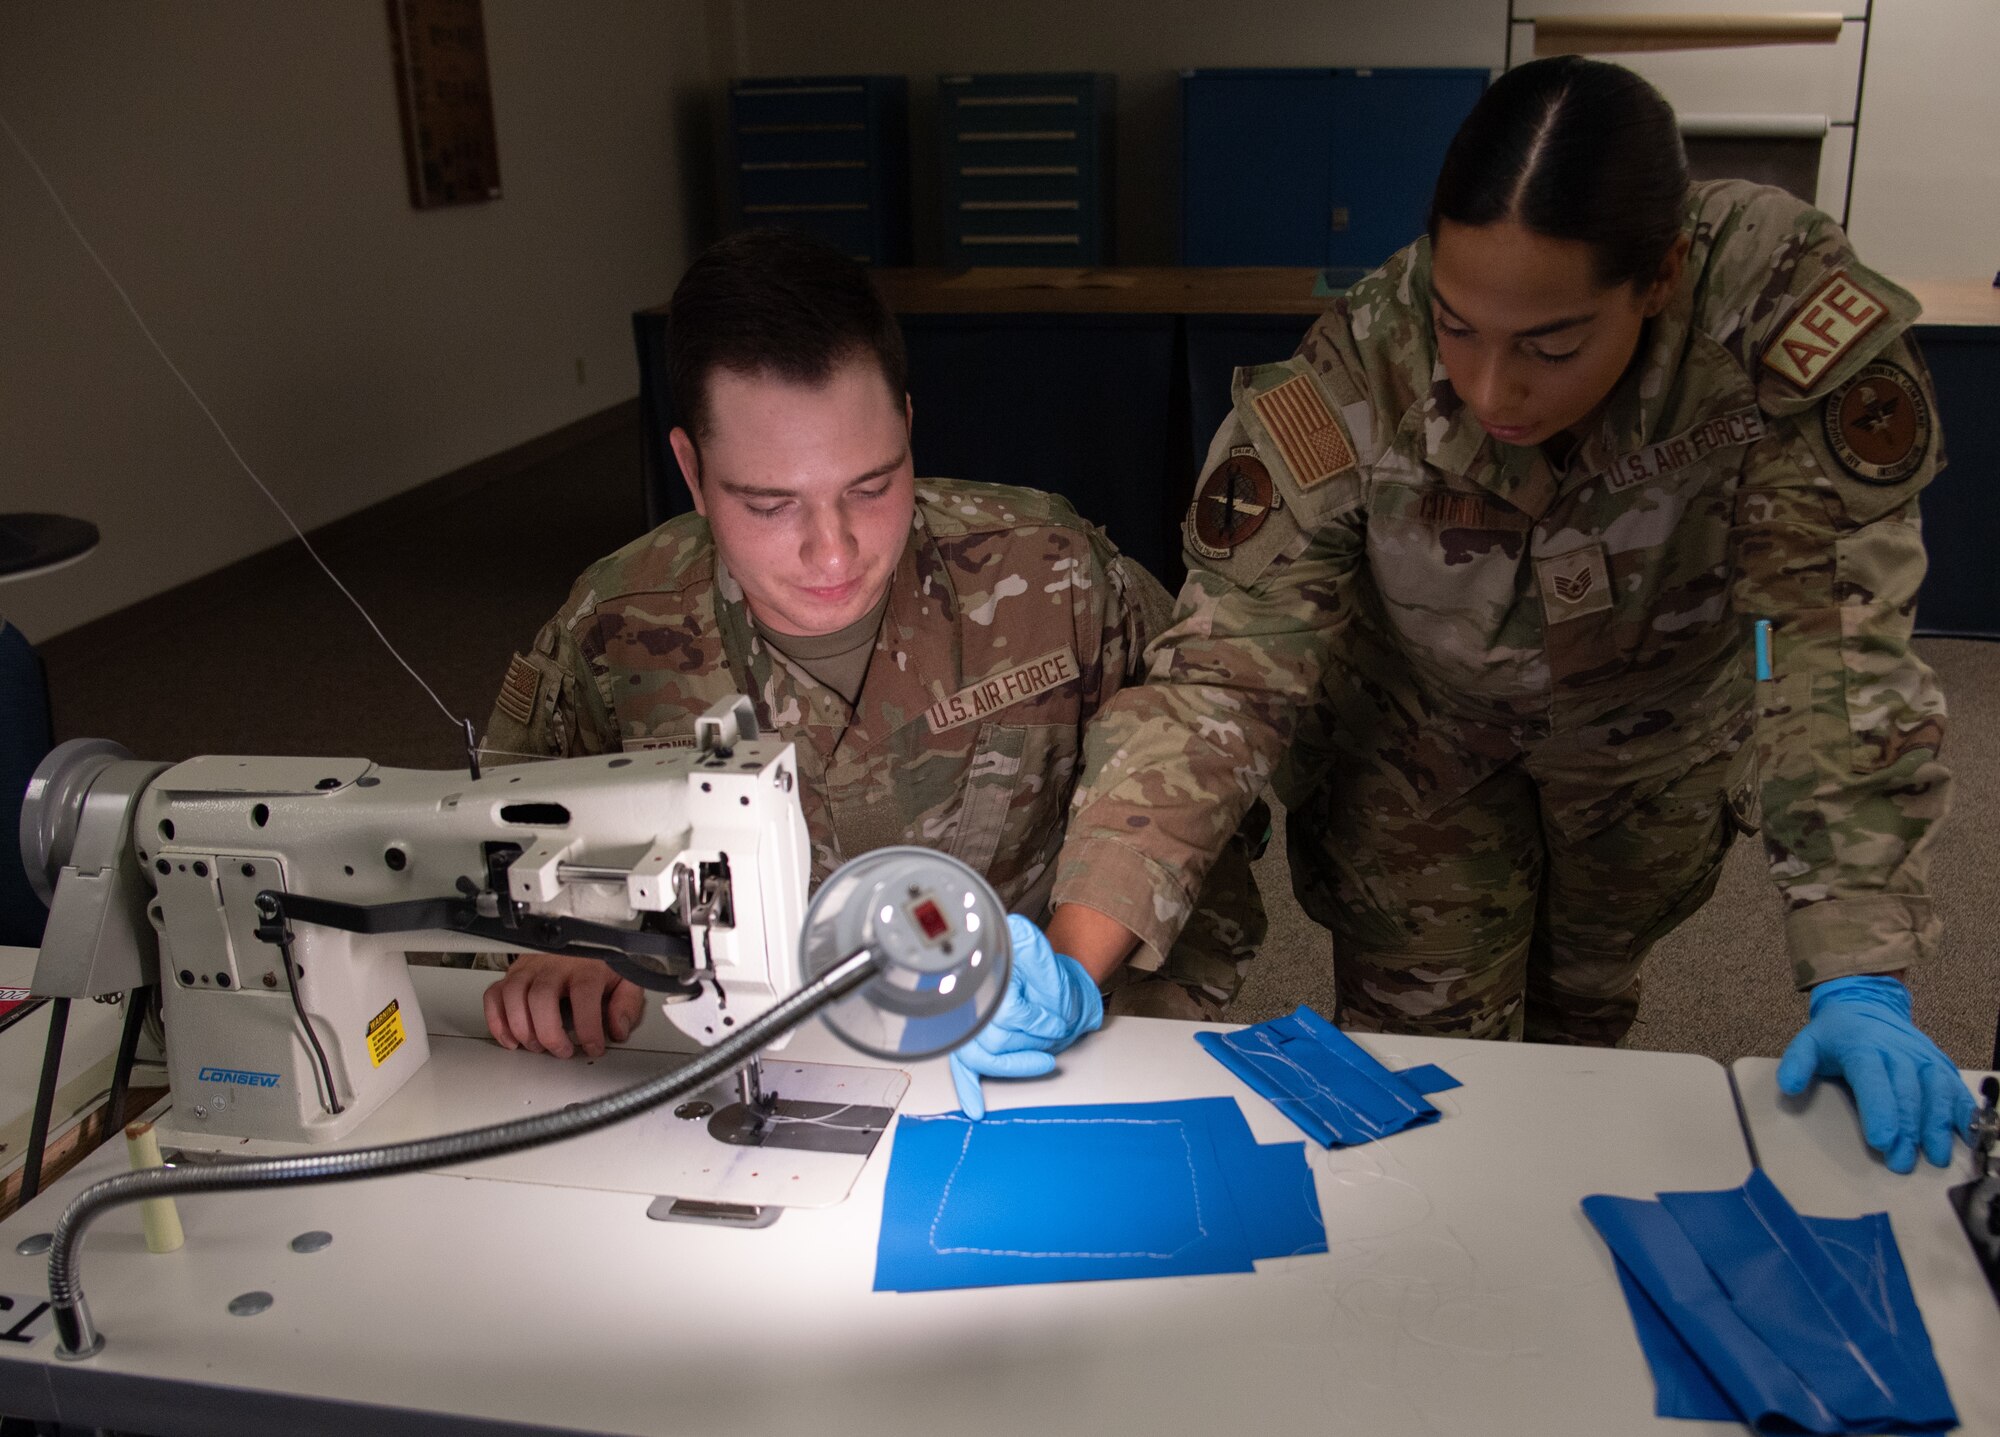 An Air Force instructor leans over an Airman at a sewing machine